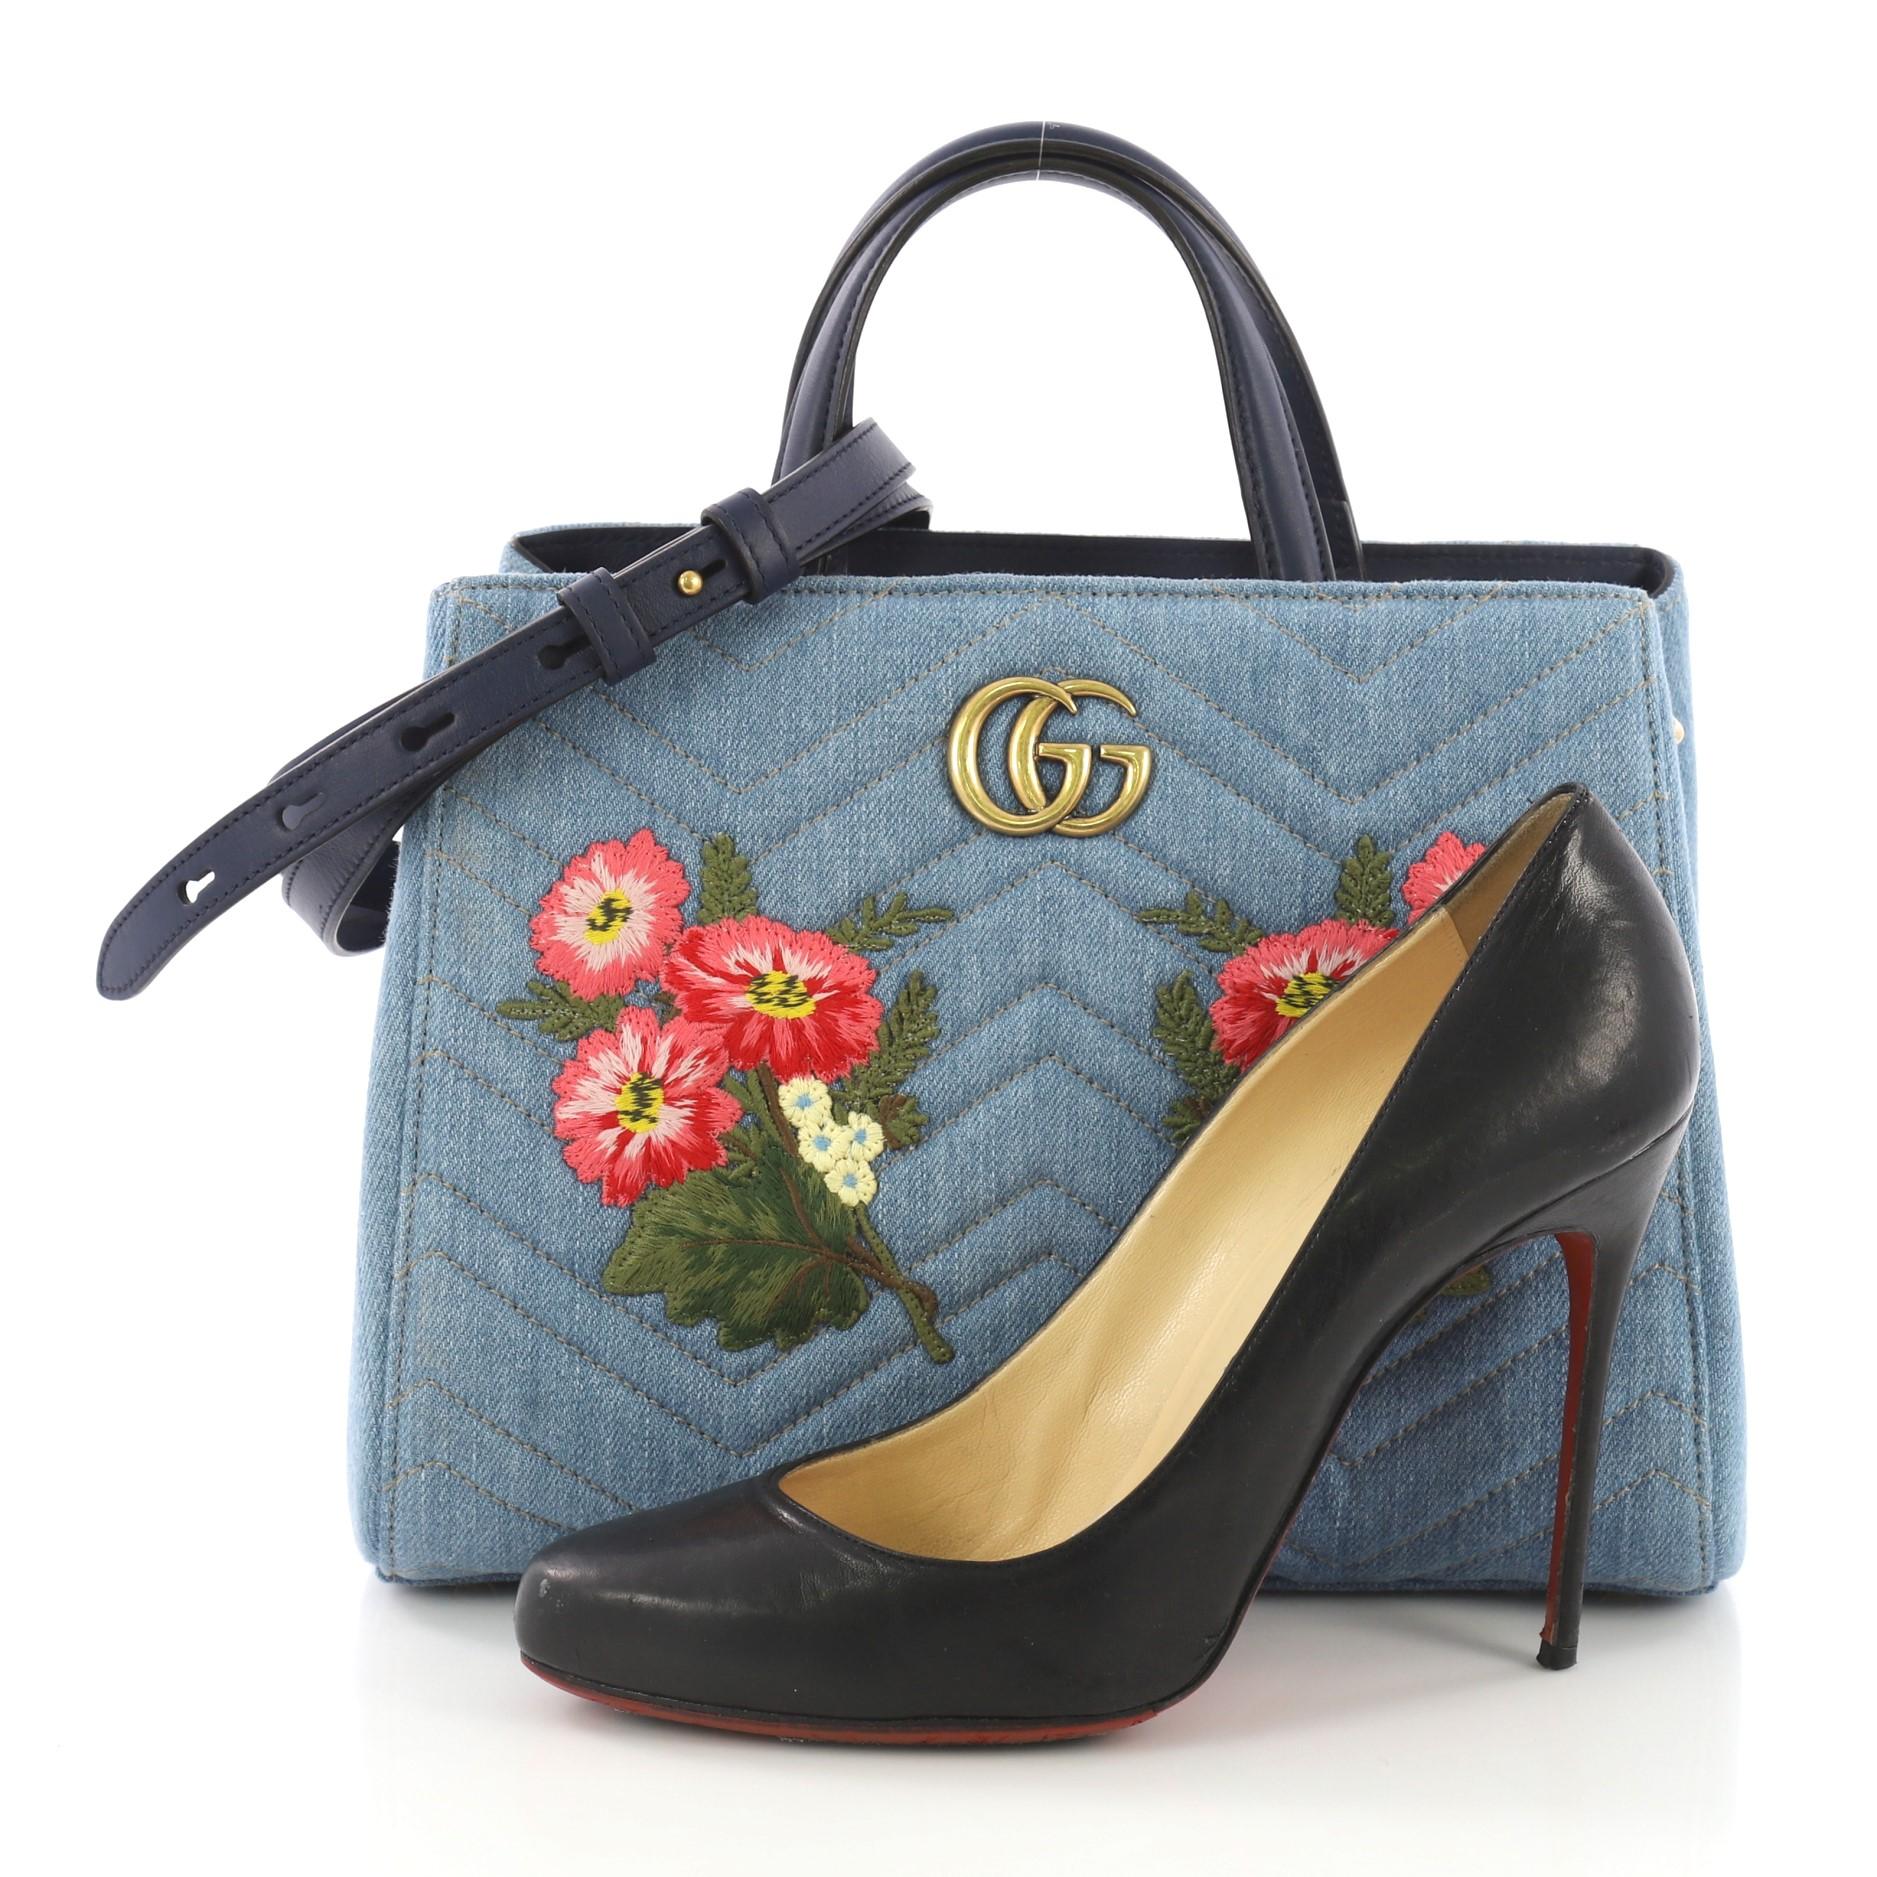 This Gucci GG Marmont Tote Embroidered Matelasse Denim Small, crafted from blue embroidered matelasse denim, features dual top leather handles, interlocking GG logo, floral embroidery details, and aged gold-tone hardware. Its magnetic snap closure